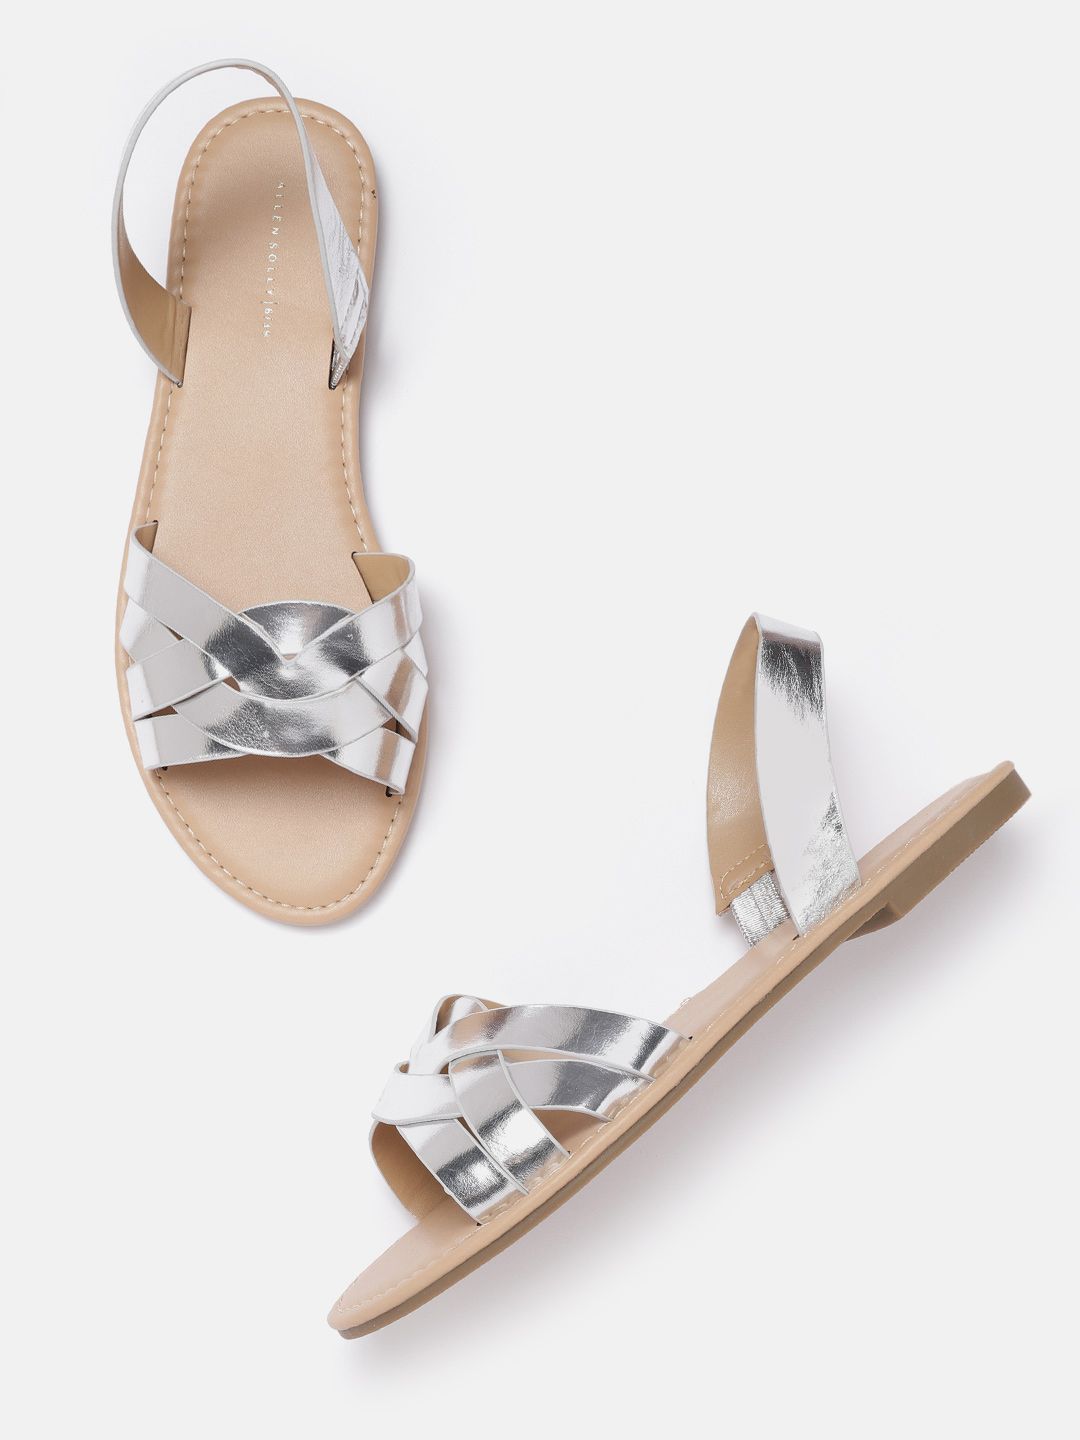 Allen Solly Women Silver-Toned Solid Criss-Cross Open Toe Flats Price in India